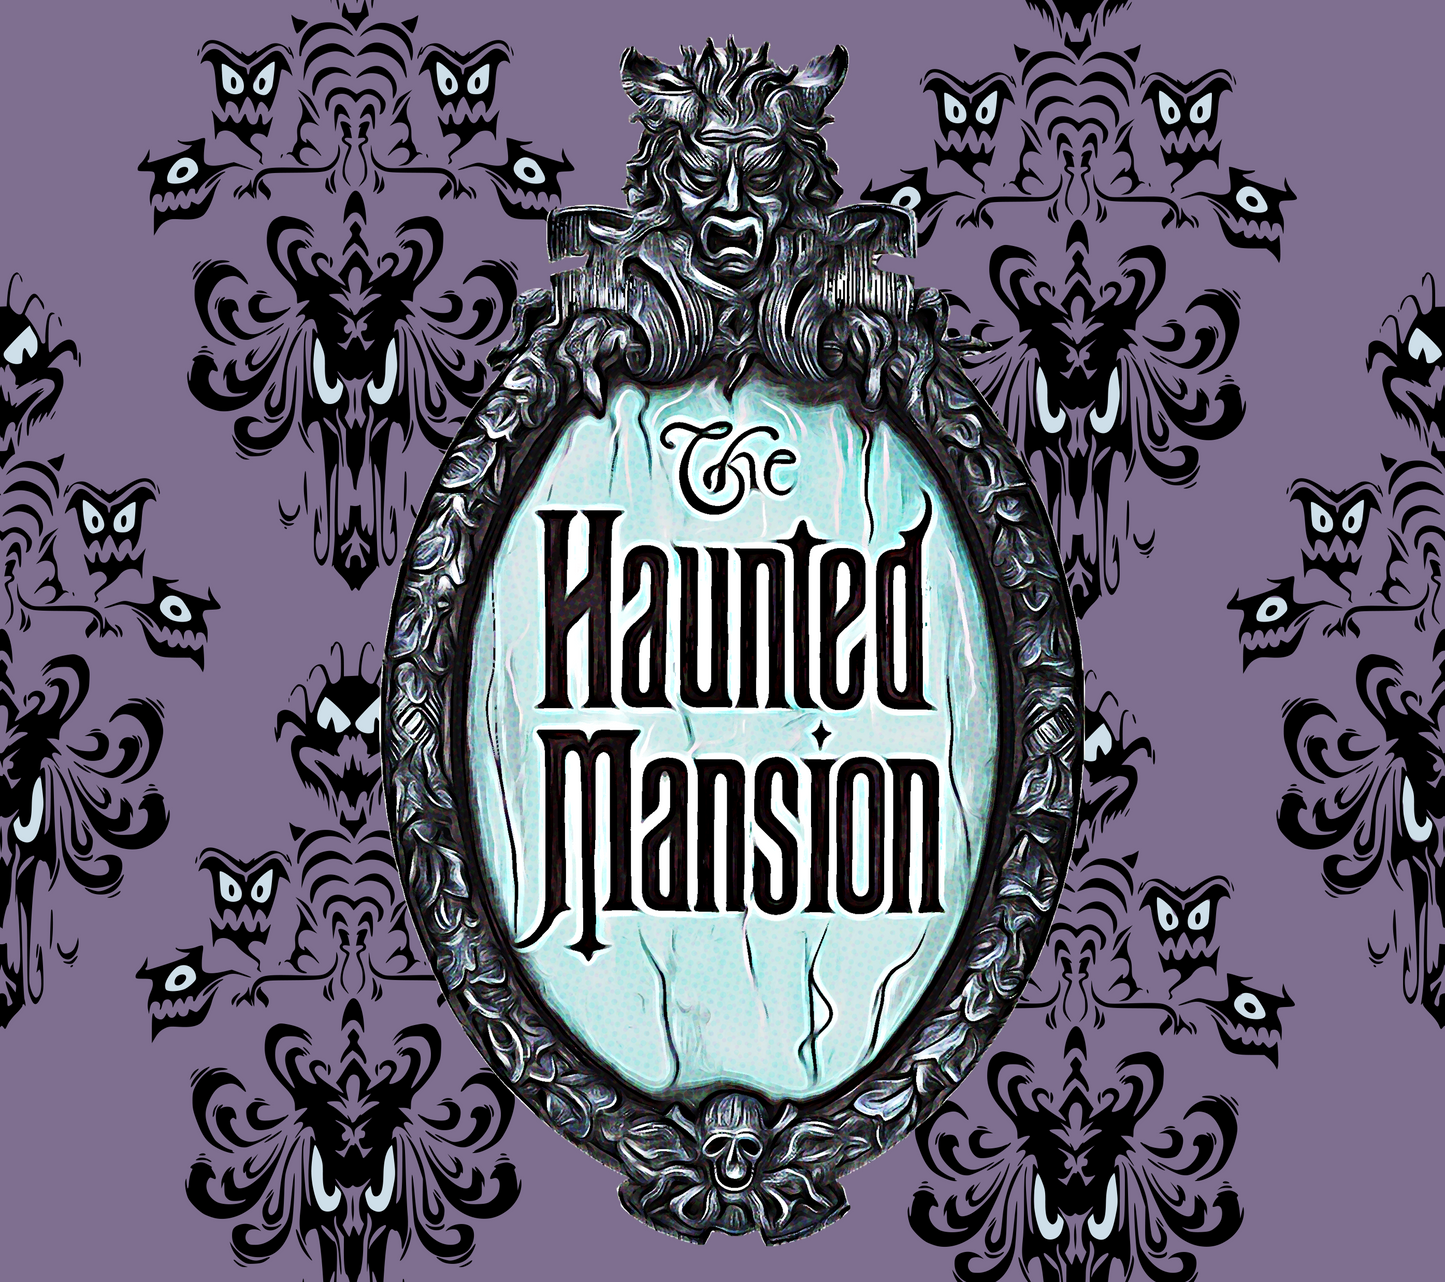 Halloween The Haunted Mansion - 20 Oz Sublimation Transfer